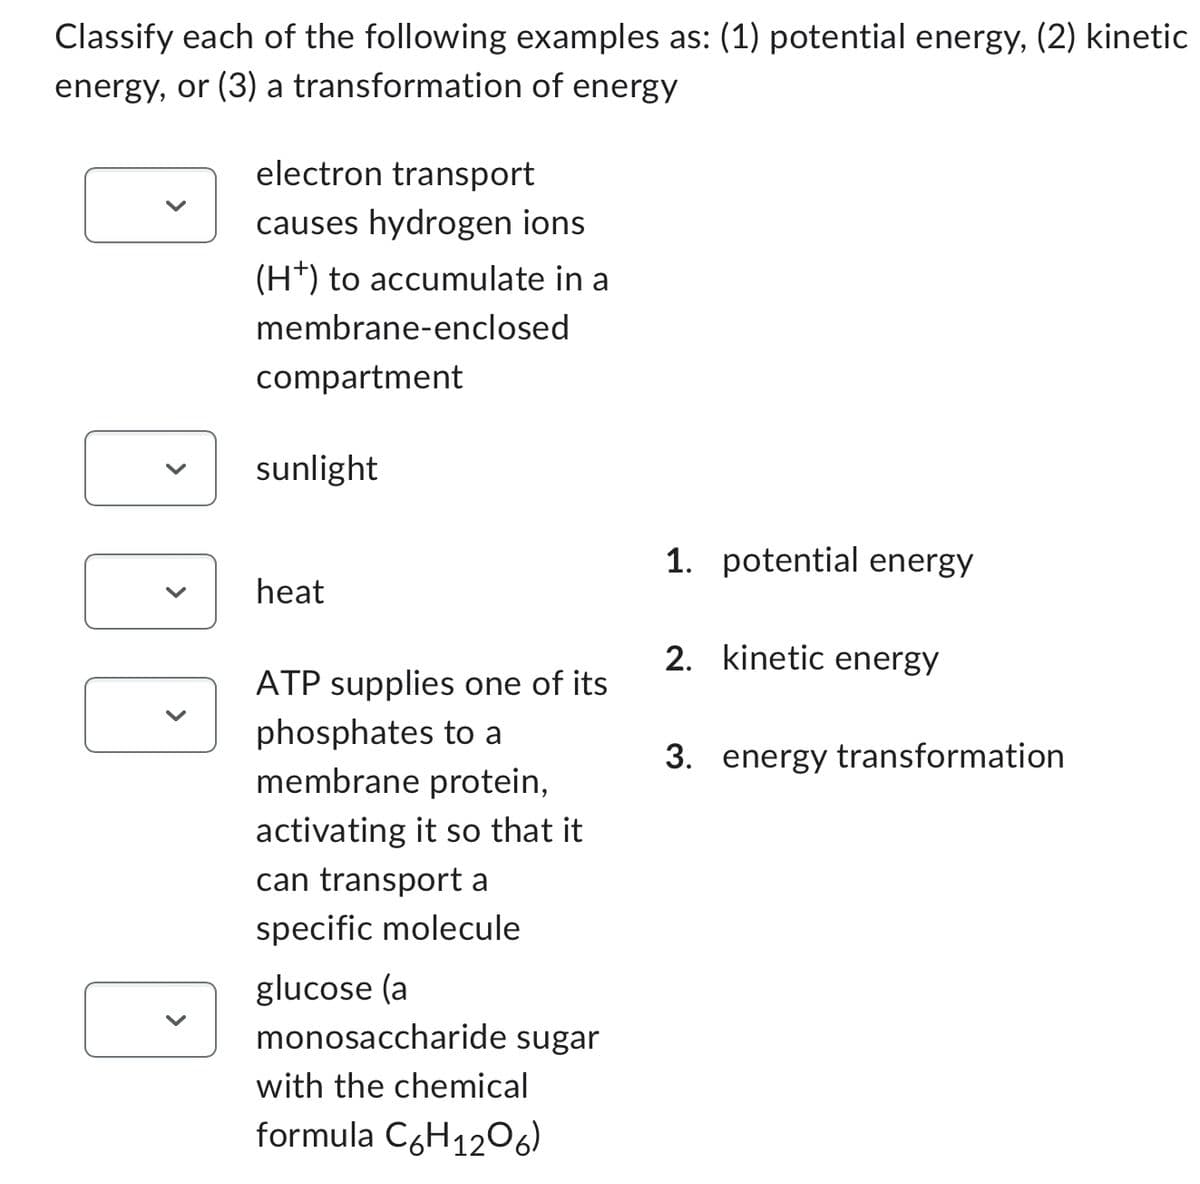 Classify each of the following examples as: (1) potential energy, (2) kinetic
energy, or (3) a transformation of energy
DOD
electron transport
causes hydrogen ions
(H+) to accumulate in a
membrane-enclosed
compartment
sunlight
heat
ATP supplies one of its
phosphates to a
membrane protein,
activating it so that it
can transport a
specific molecule
glucose (a
monosaccharide sugar
with the chemical
formula C6H1206)
1. potential energy
2. kinetic energy
3. energy transformation